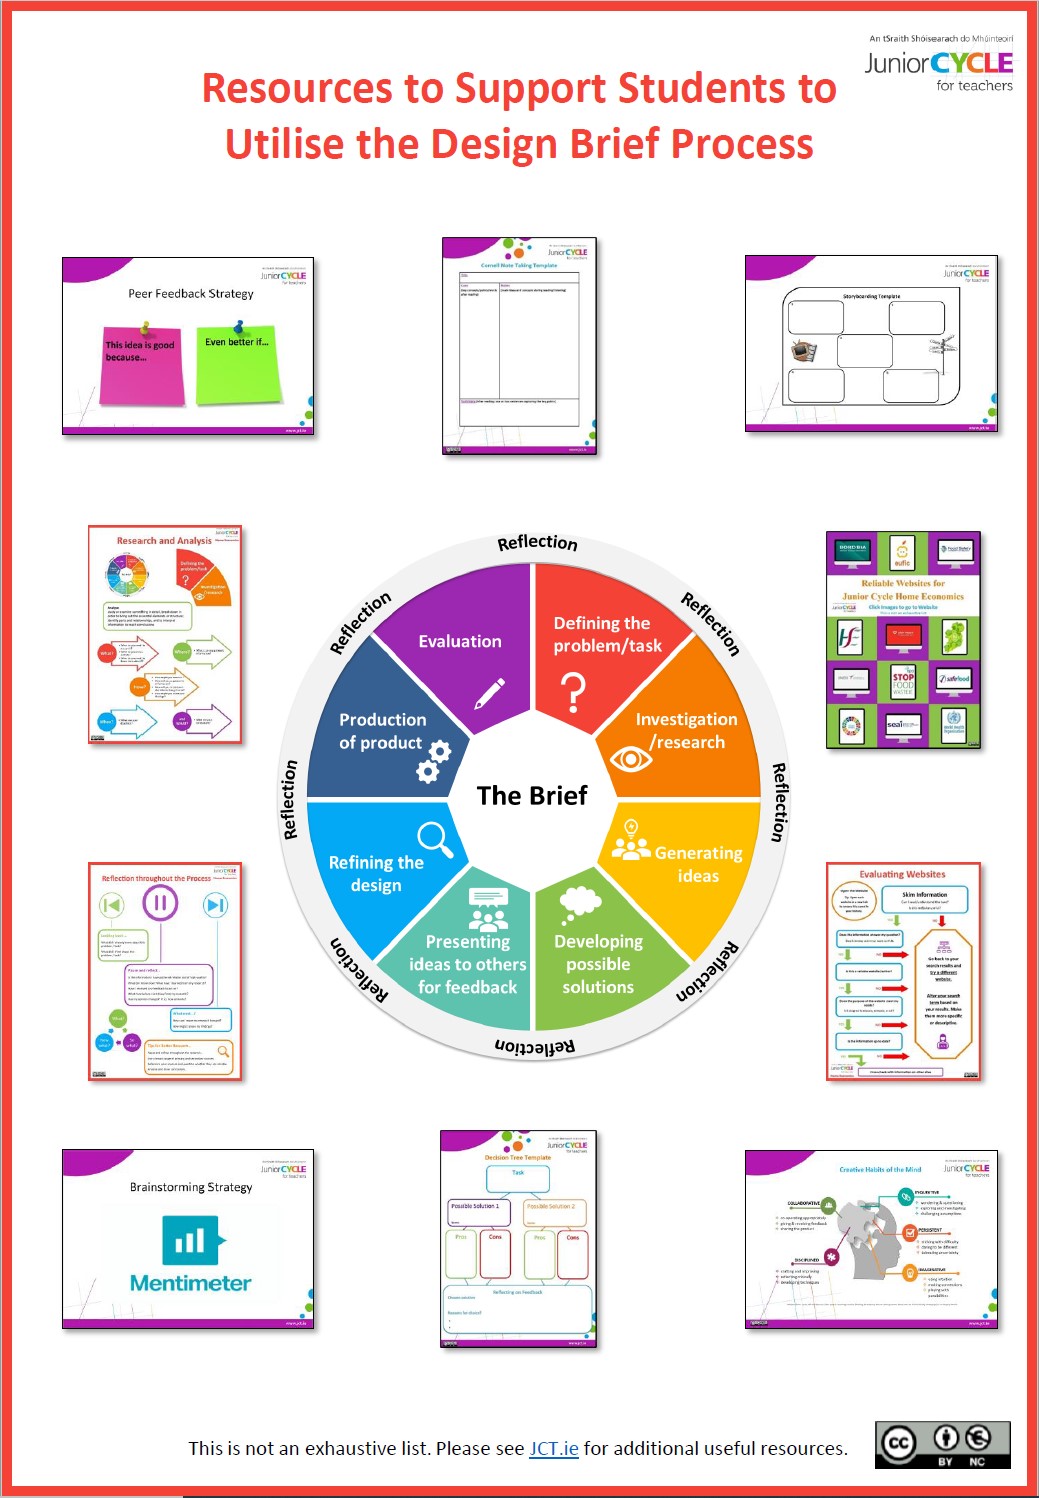 Resources to Support Students to Utilise the Design Brief Process